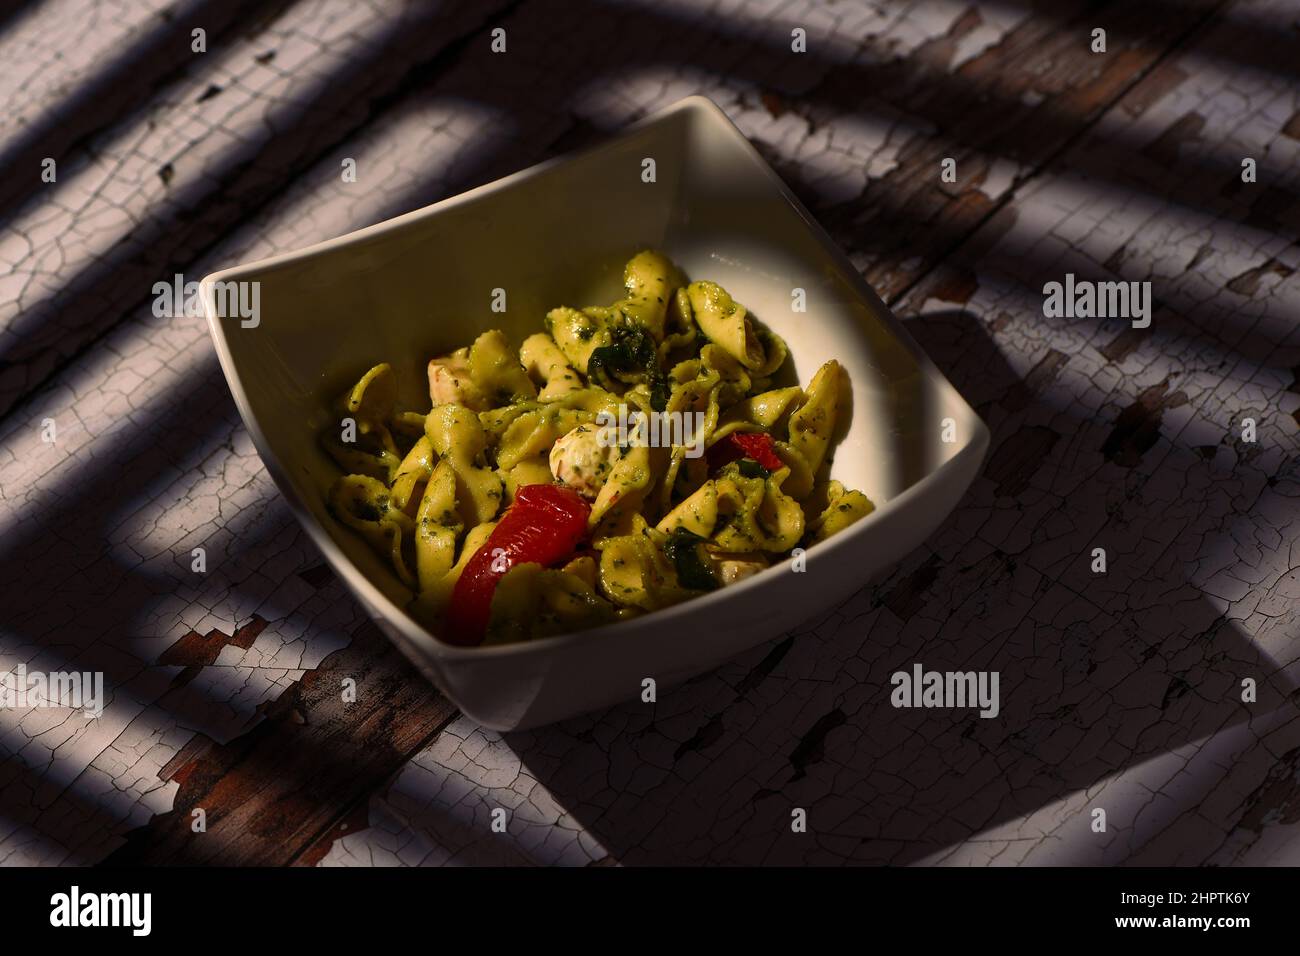 Mozzarella, tomato and pesto pasta salad in a white square dish on a distressed table with sun window shadows falling across the table and dish. Stock Photo